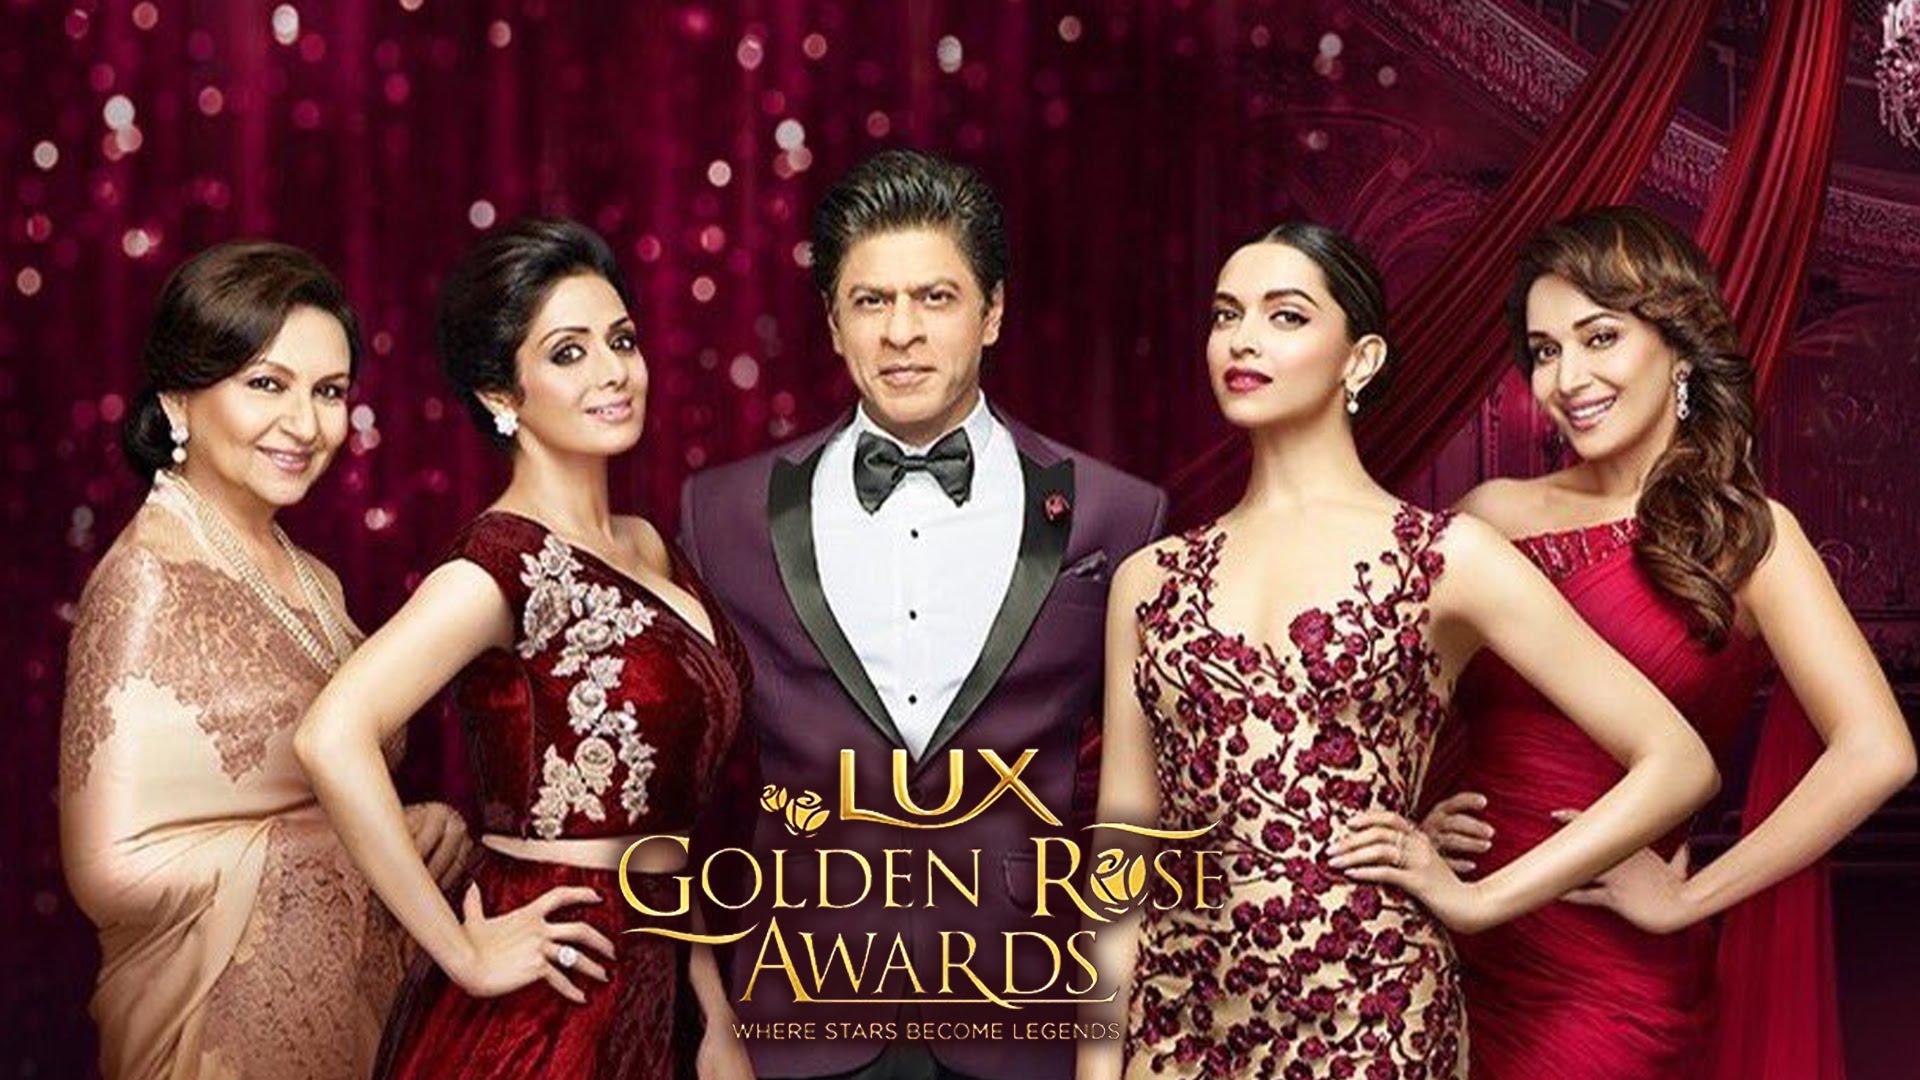 A GRAND EXTRAVAGANZA, THE SECOND EDITION OF LUX GOLDEN ROSE AWARDS IS BACK